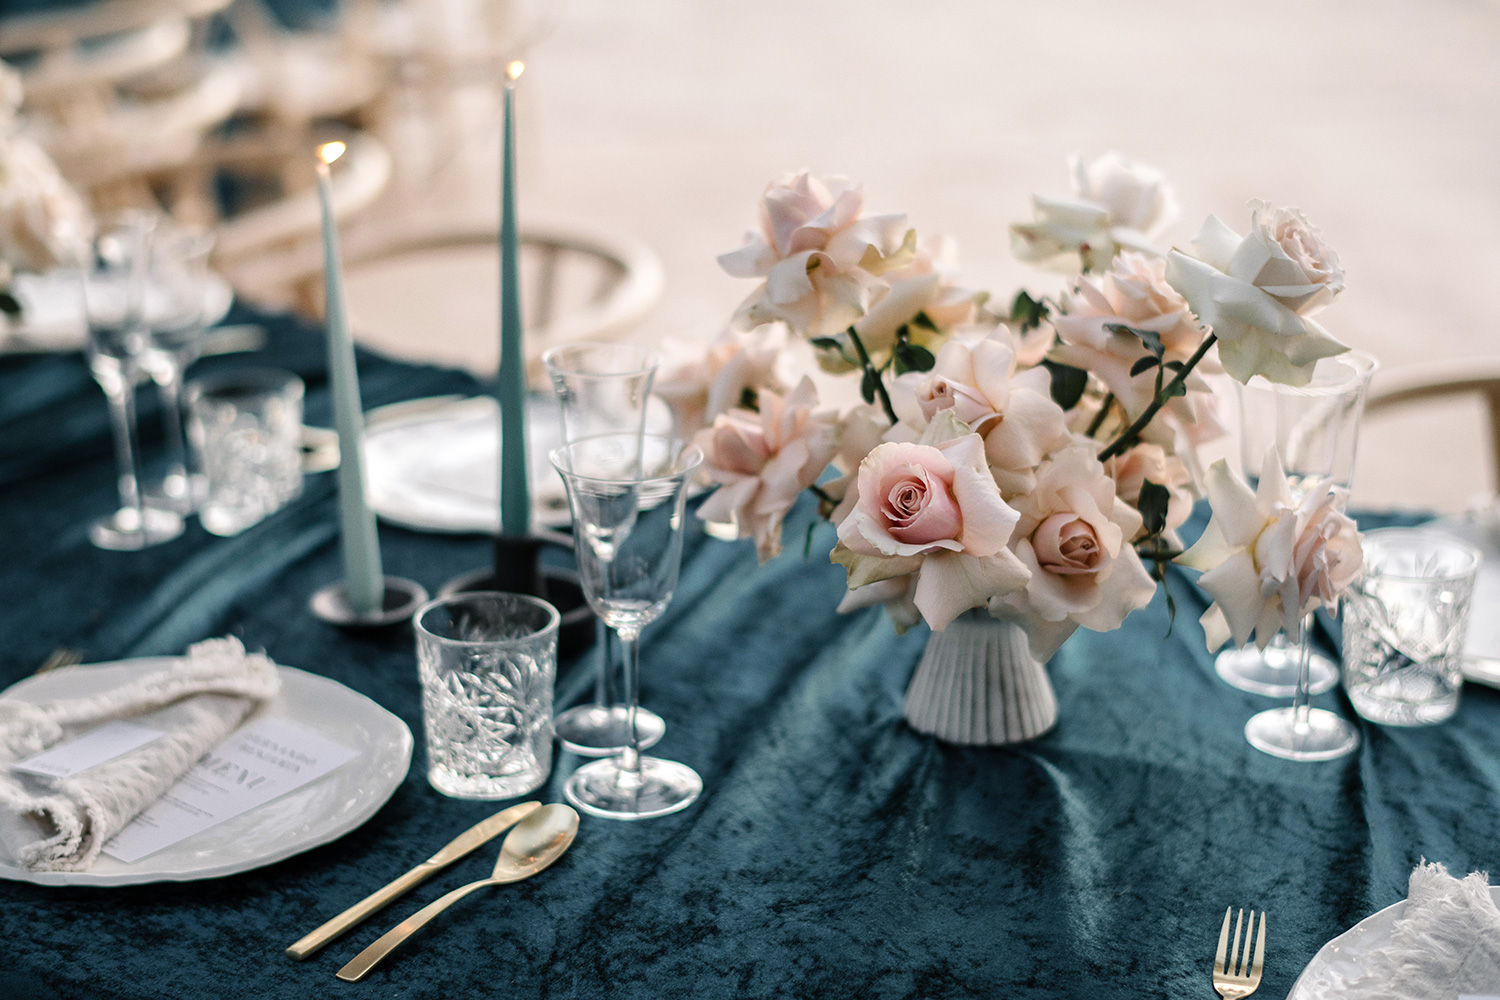 Wedding Reception Table Setting in Blue Velvet and Blush Roses by Talia Belle Wedding Planner in Mallorca